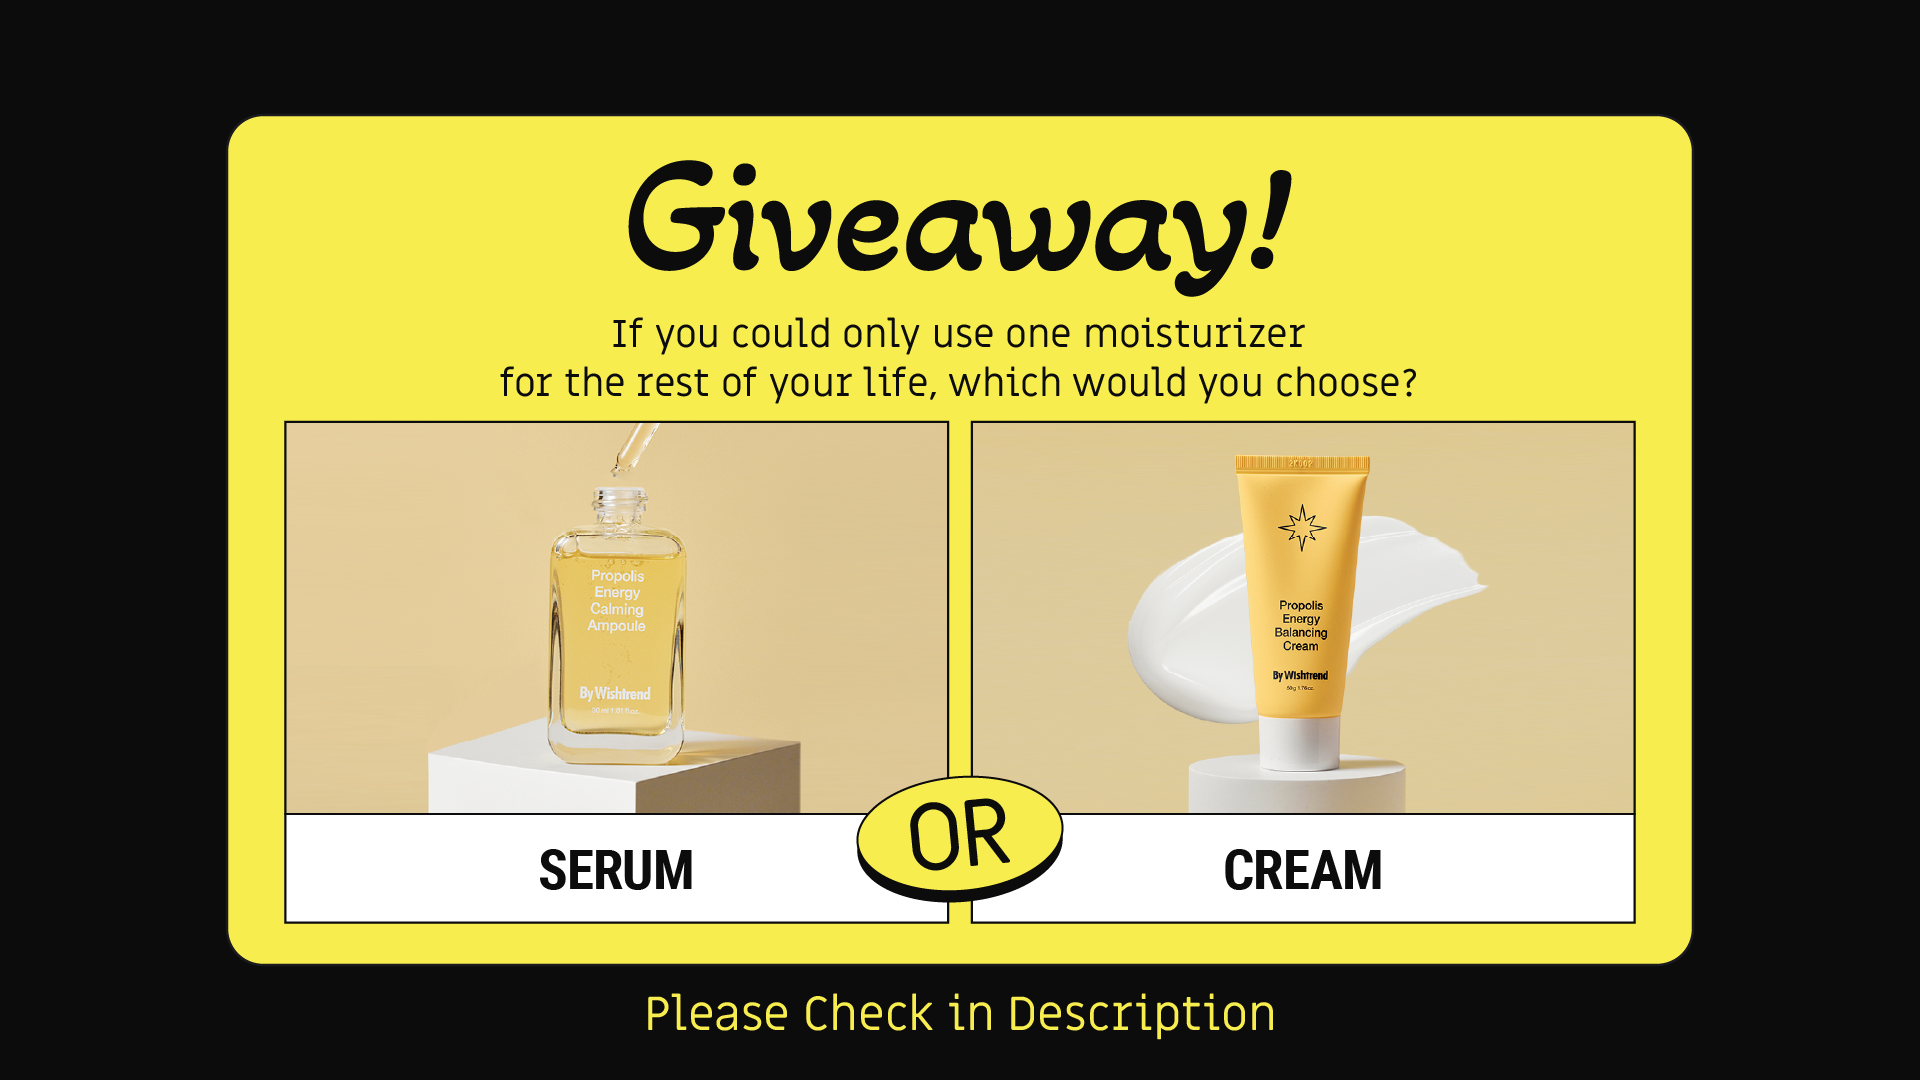 [Wish You Could Choose One] If you could only do one moisturizer for the rest of your life, what would it be?